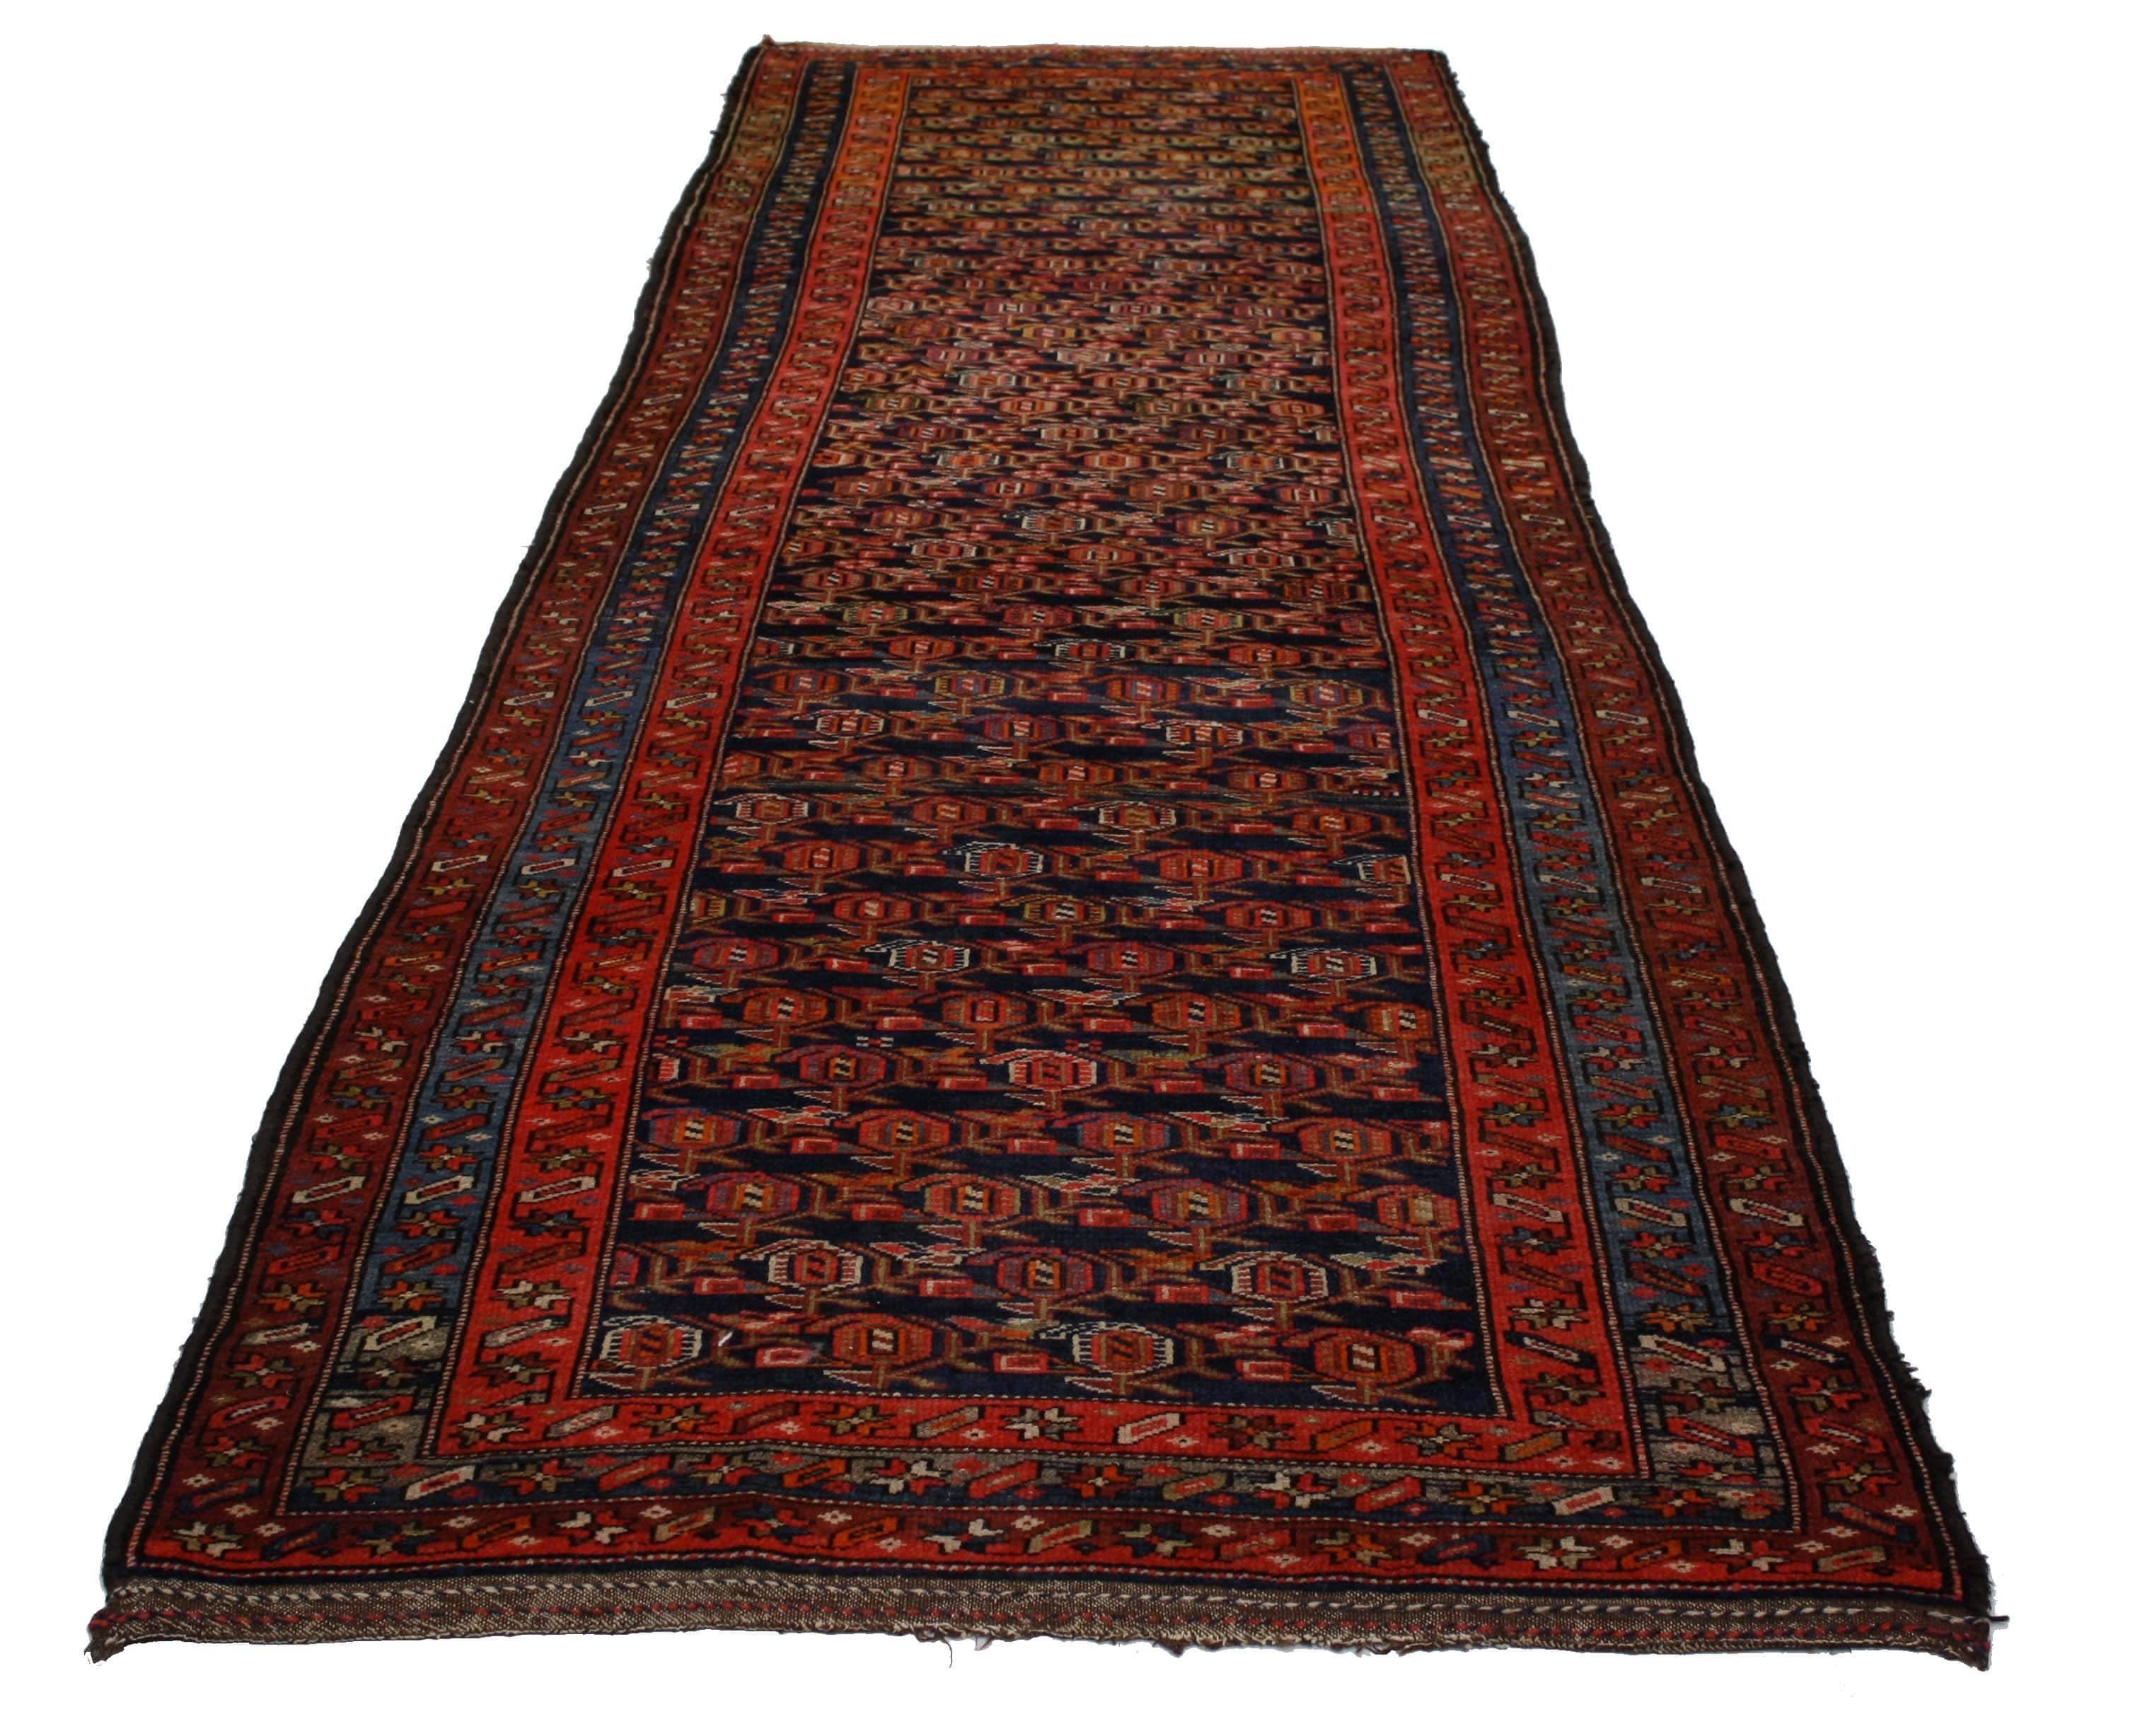 76615 antique Persian Kurdish runner, long Kurd Hallway runner. This hand-knotted wool antique Persian Kurdish runner features an all-over Boteh design pattern on an ink blue background. The Boteh resembles sprouting seed and is known as the 